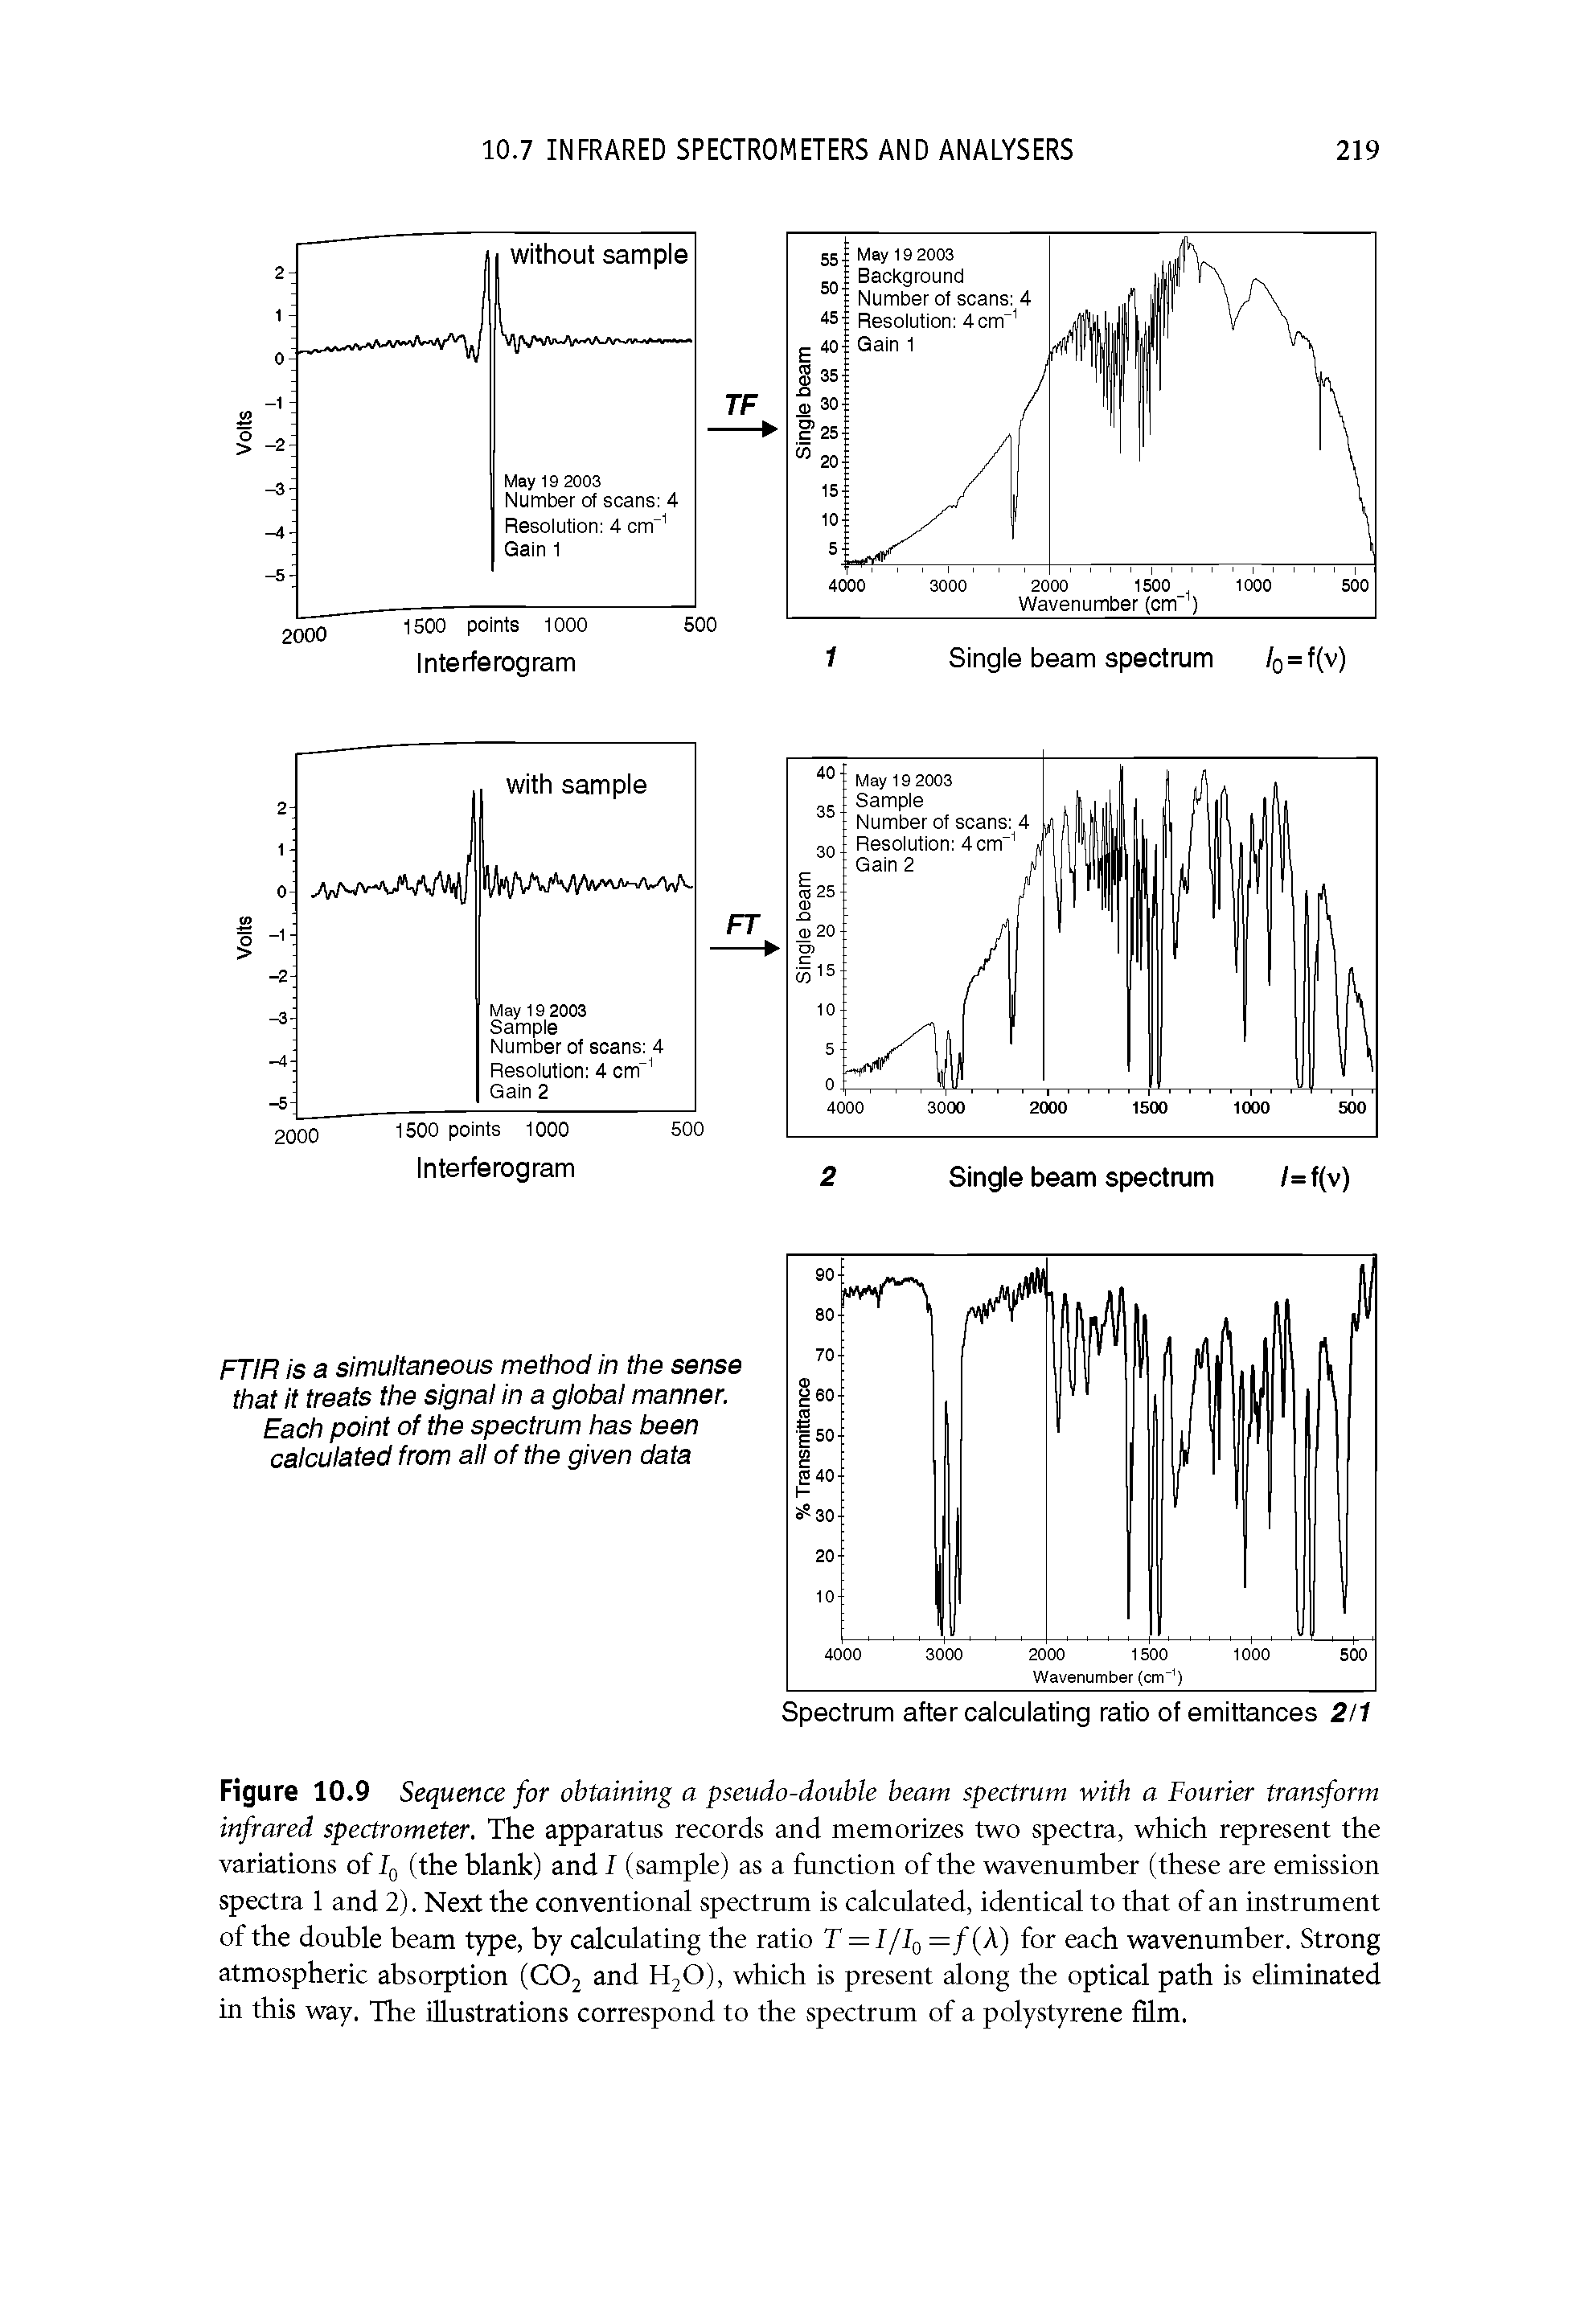 Figure 10.9 Sequence for obtaining a pseudo-double beam spectrum with a Fourier transform infrared spectrometer. The apparatus records and memorizes two spectra, which represent the variations of 7q (the blank) and I (sample) as a function of the wavenumber (these are emission spectra 1 and 2). Next the conventional spectrum is calculated, identical to that of an instrument of the double beam type, by calculating the ratio T = 1/4 = fW for each wavenumber. Strong atmospheric absorption (COj and HjO), which is present along the optical path is eliminated in this way. The illustrations correspond to the spectrum of a polystyrene film.